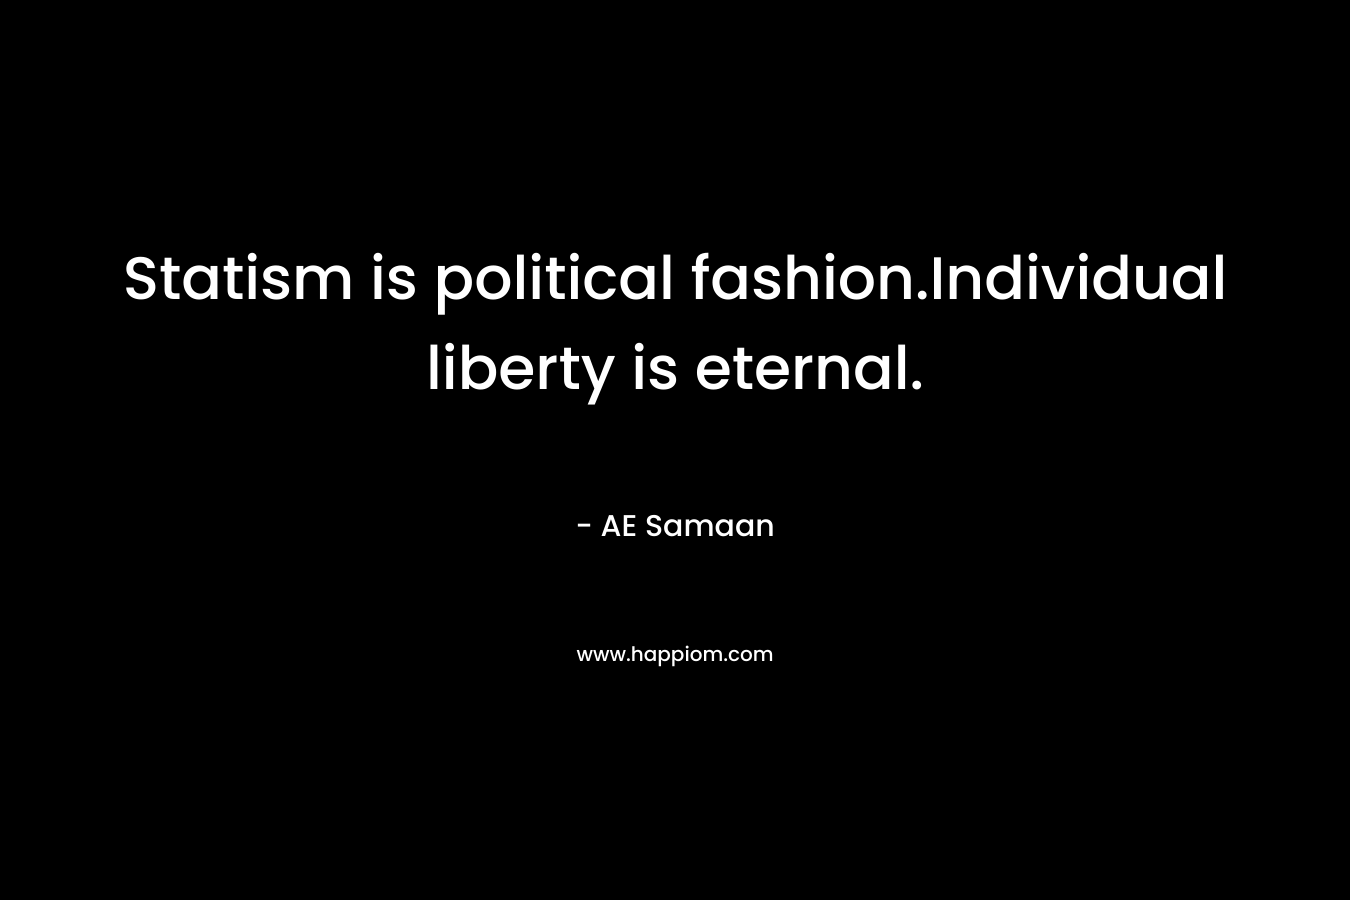 Statism is political fashion.Individual liberty is eternal.